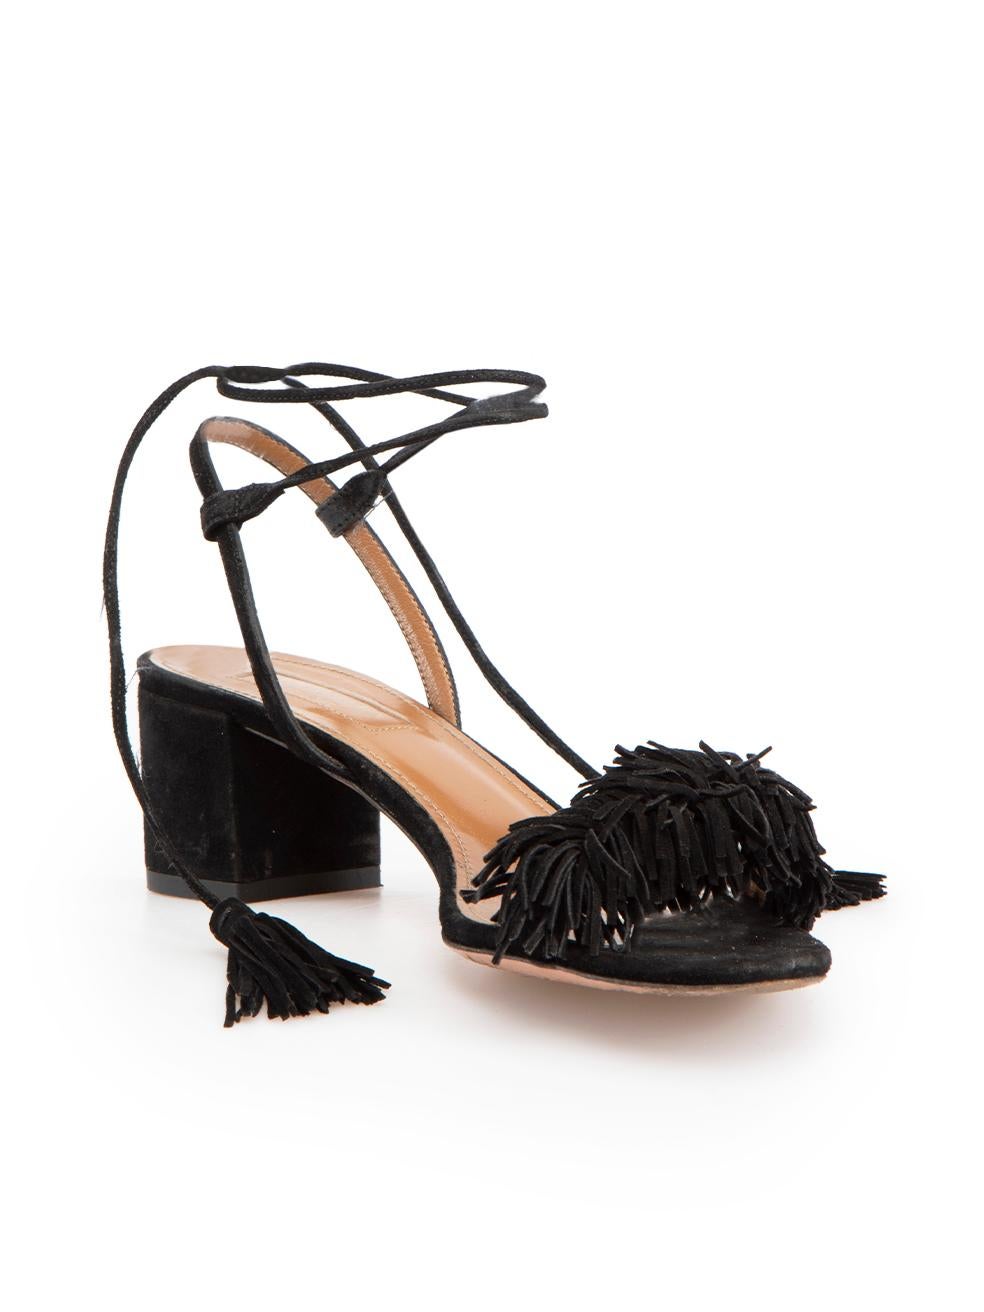 CONDITION is Good. Minor wear to shoes is evident. Light wear to the heels of both with abrasions to the suede on this used Aquazzura designer resale item.
 
 Details
 Black
 Suede
 Heeled sandals
 Peep toe
 Tassel tie fastening
 Kitten heel
 
 
